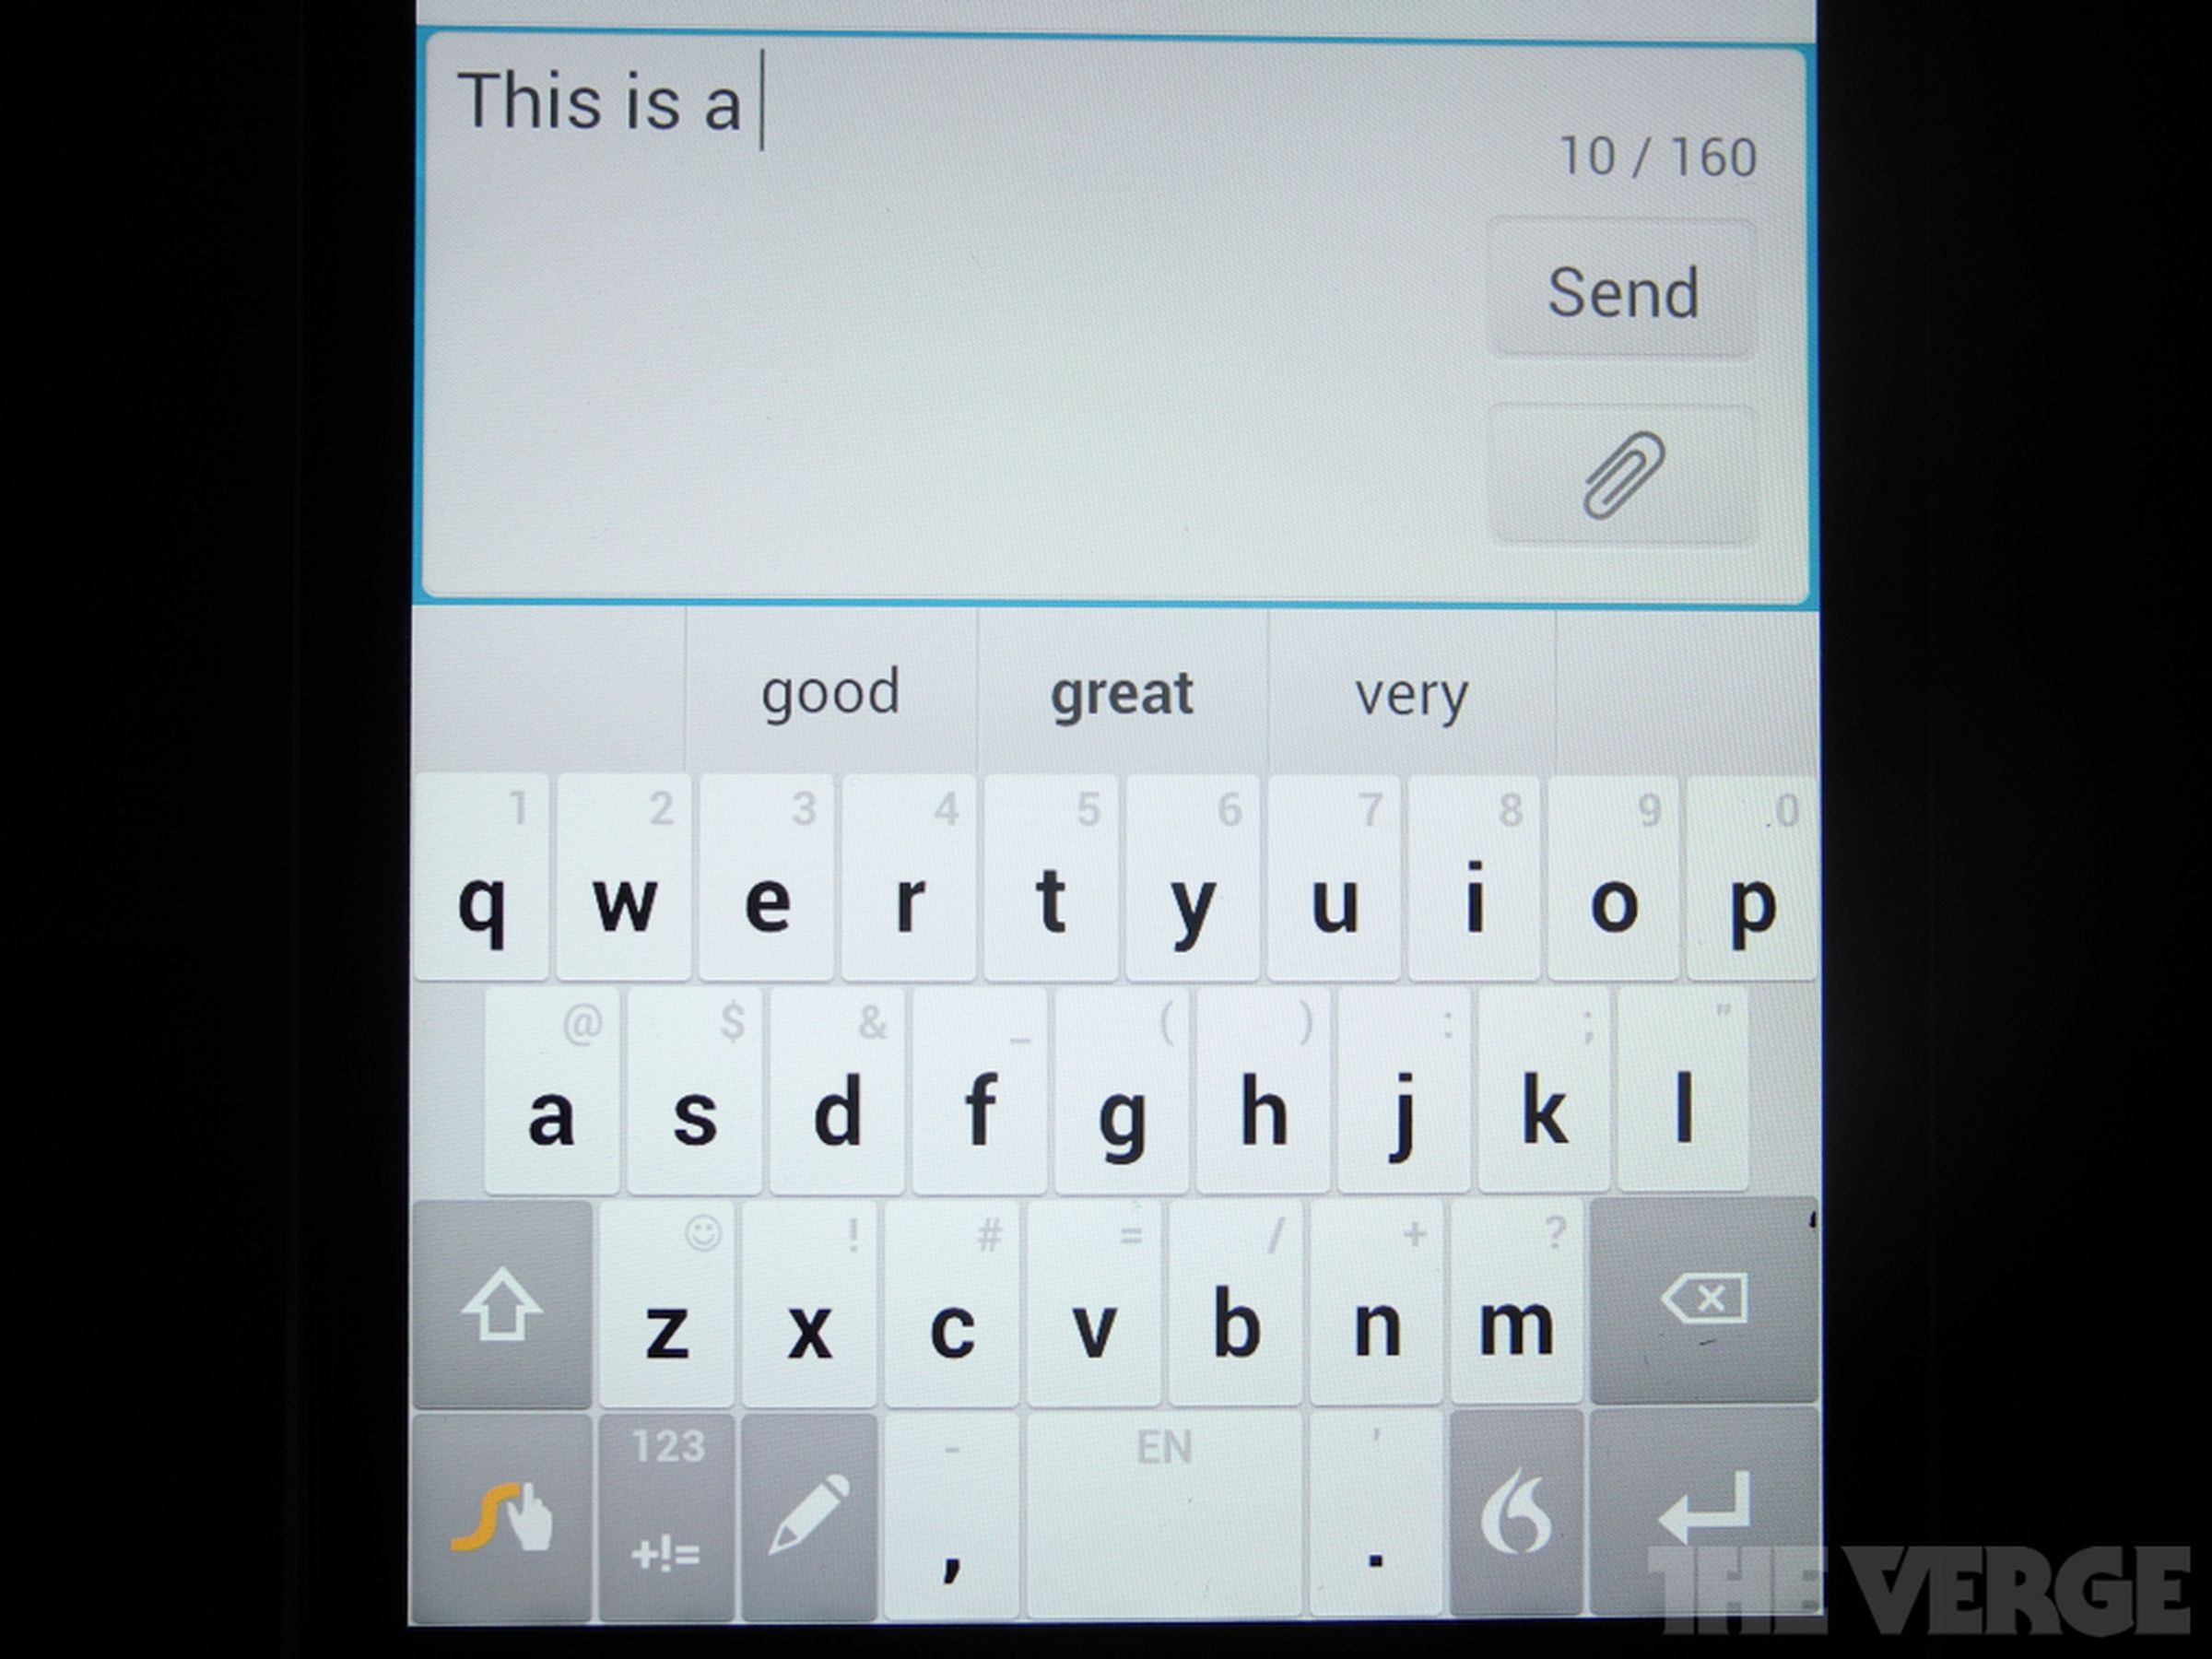 Swype hands-on